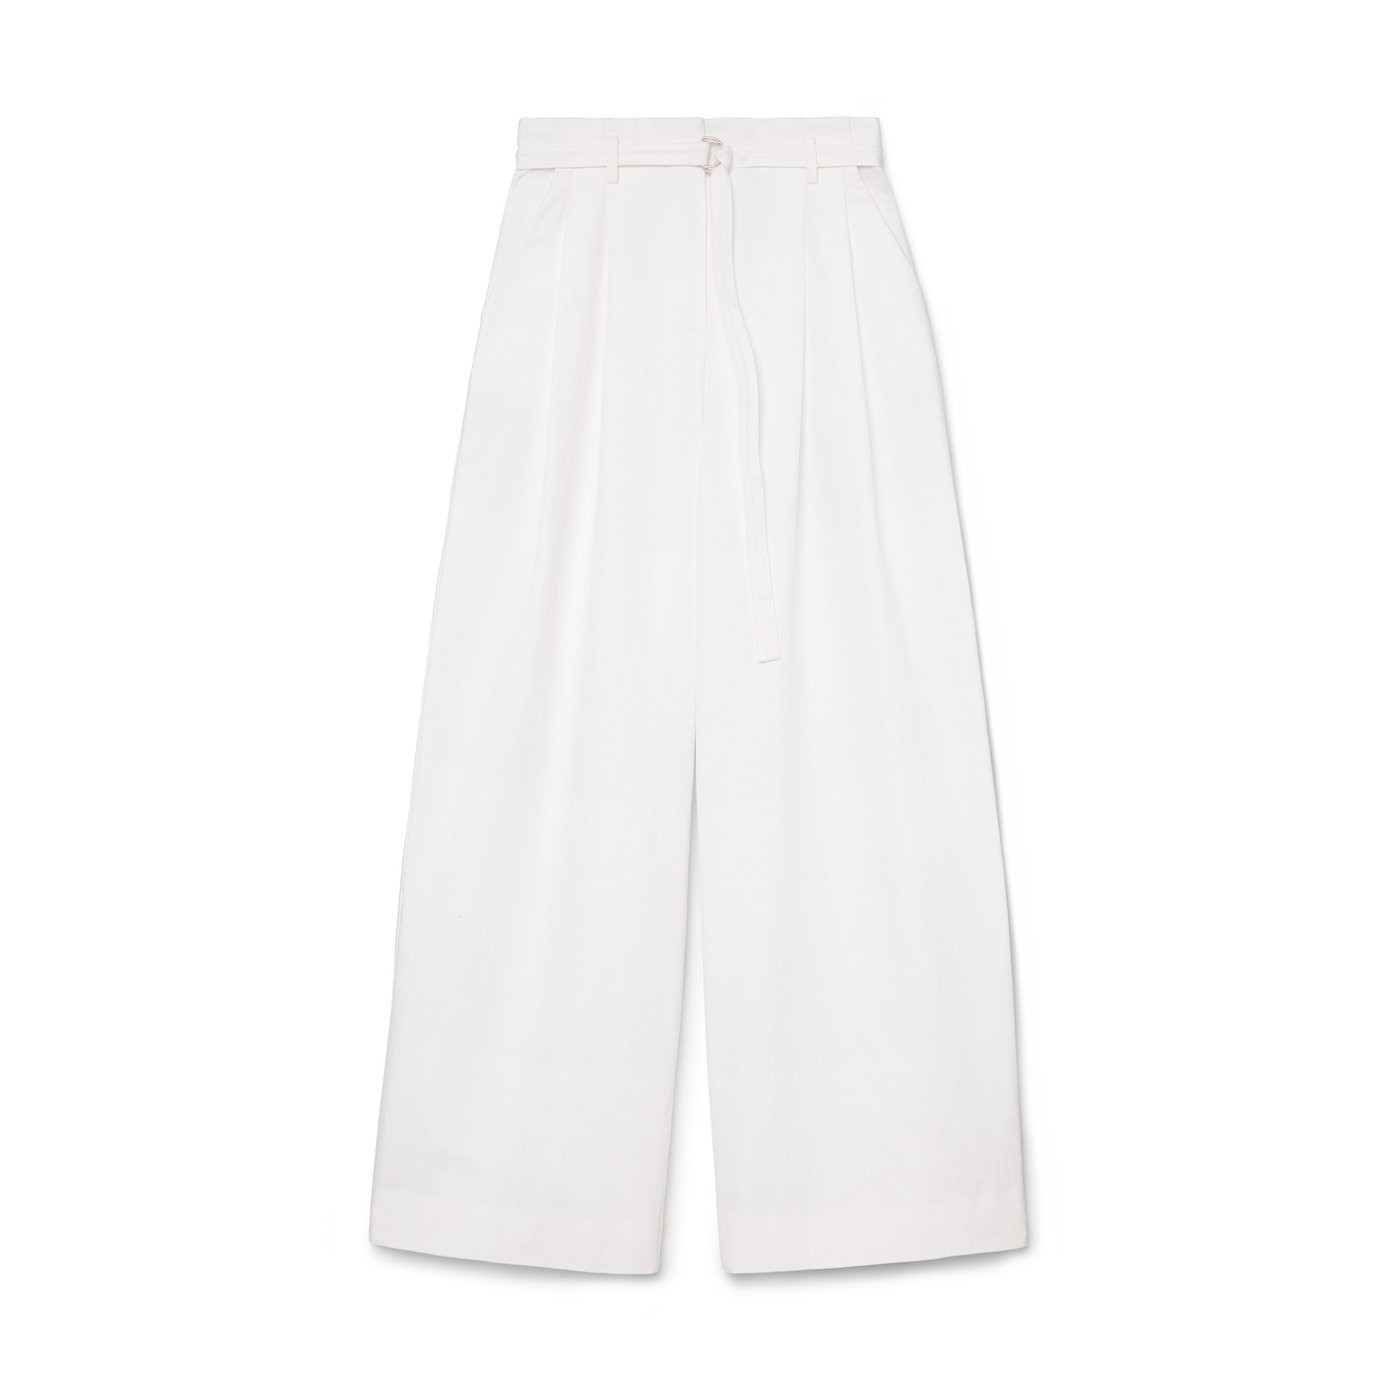 limited edition PLEATED PANTS LIMITED EDITION - Oyster White